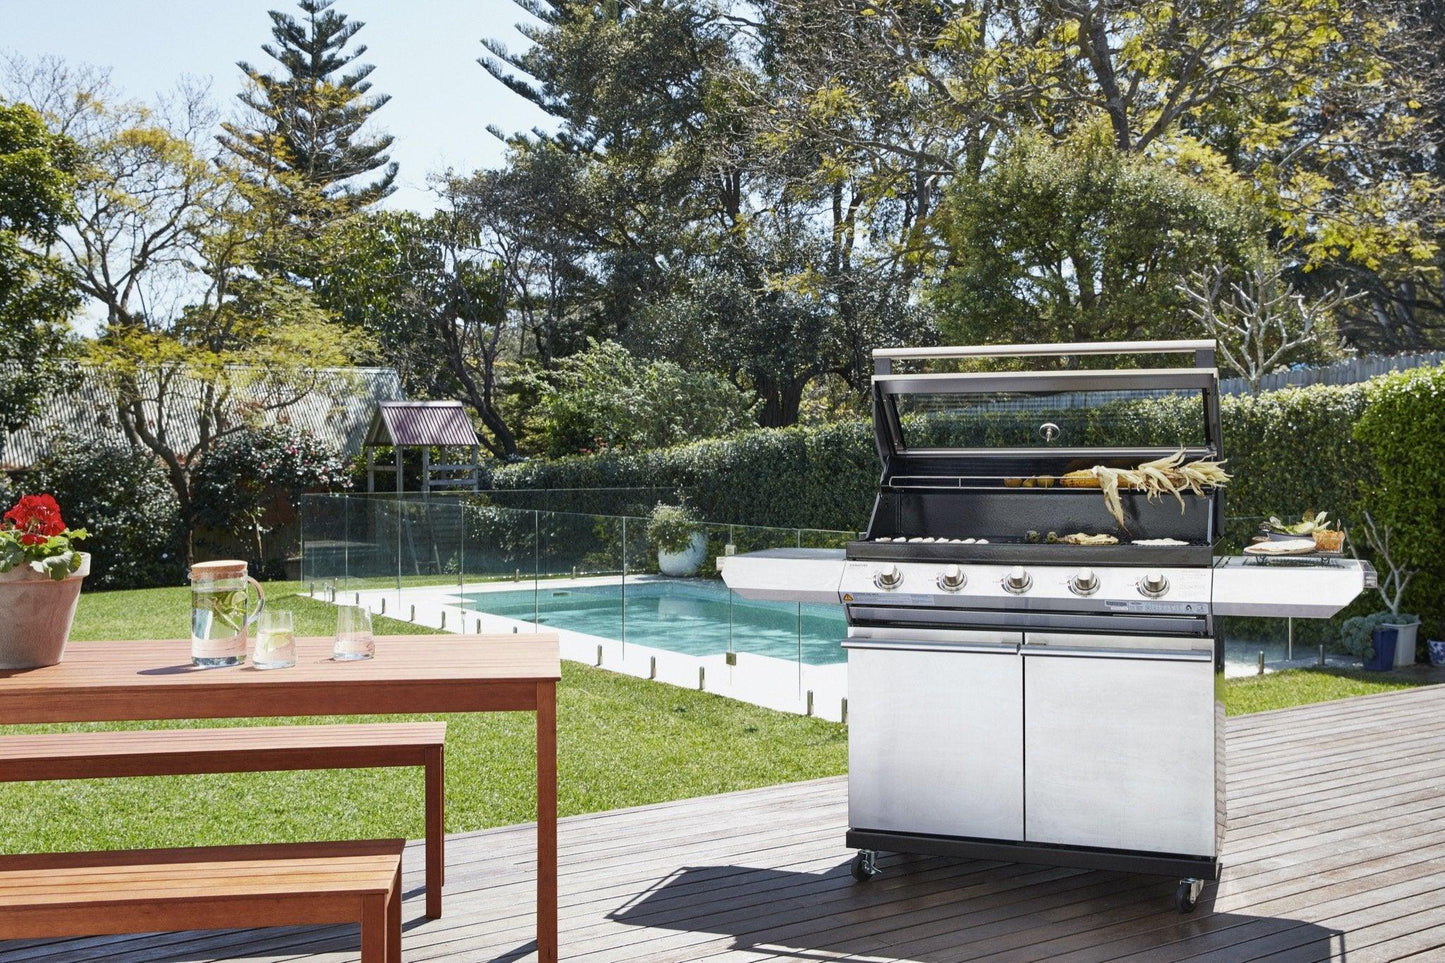 A Brisks BeefEater 1200S Series 4 Burner BBQ & Trolley with modern appeal stands on a wooden deck next to a table with a red flower pot and a water jug. The grill lid is open, showing corn being cooked. The background features a swimming pool surrounded by glass fencing and lush greenery, perfect for outdoor living.